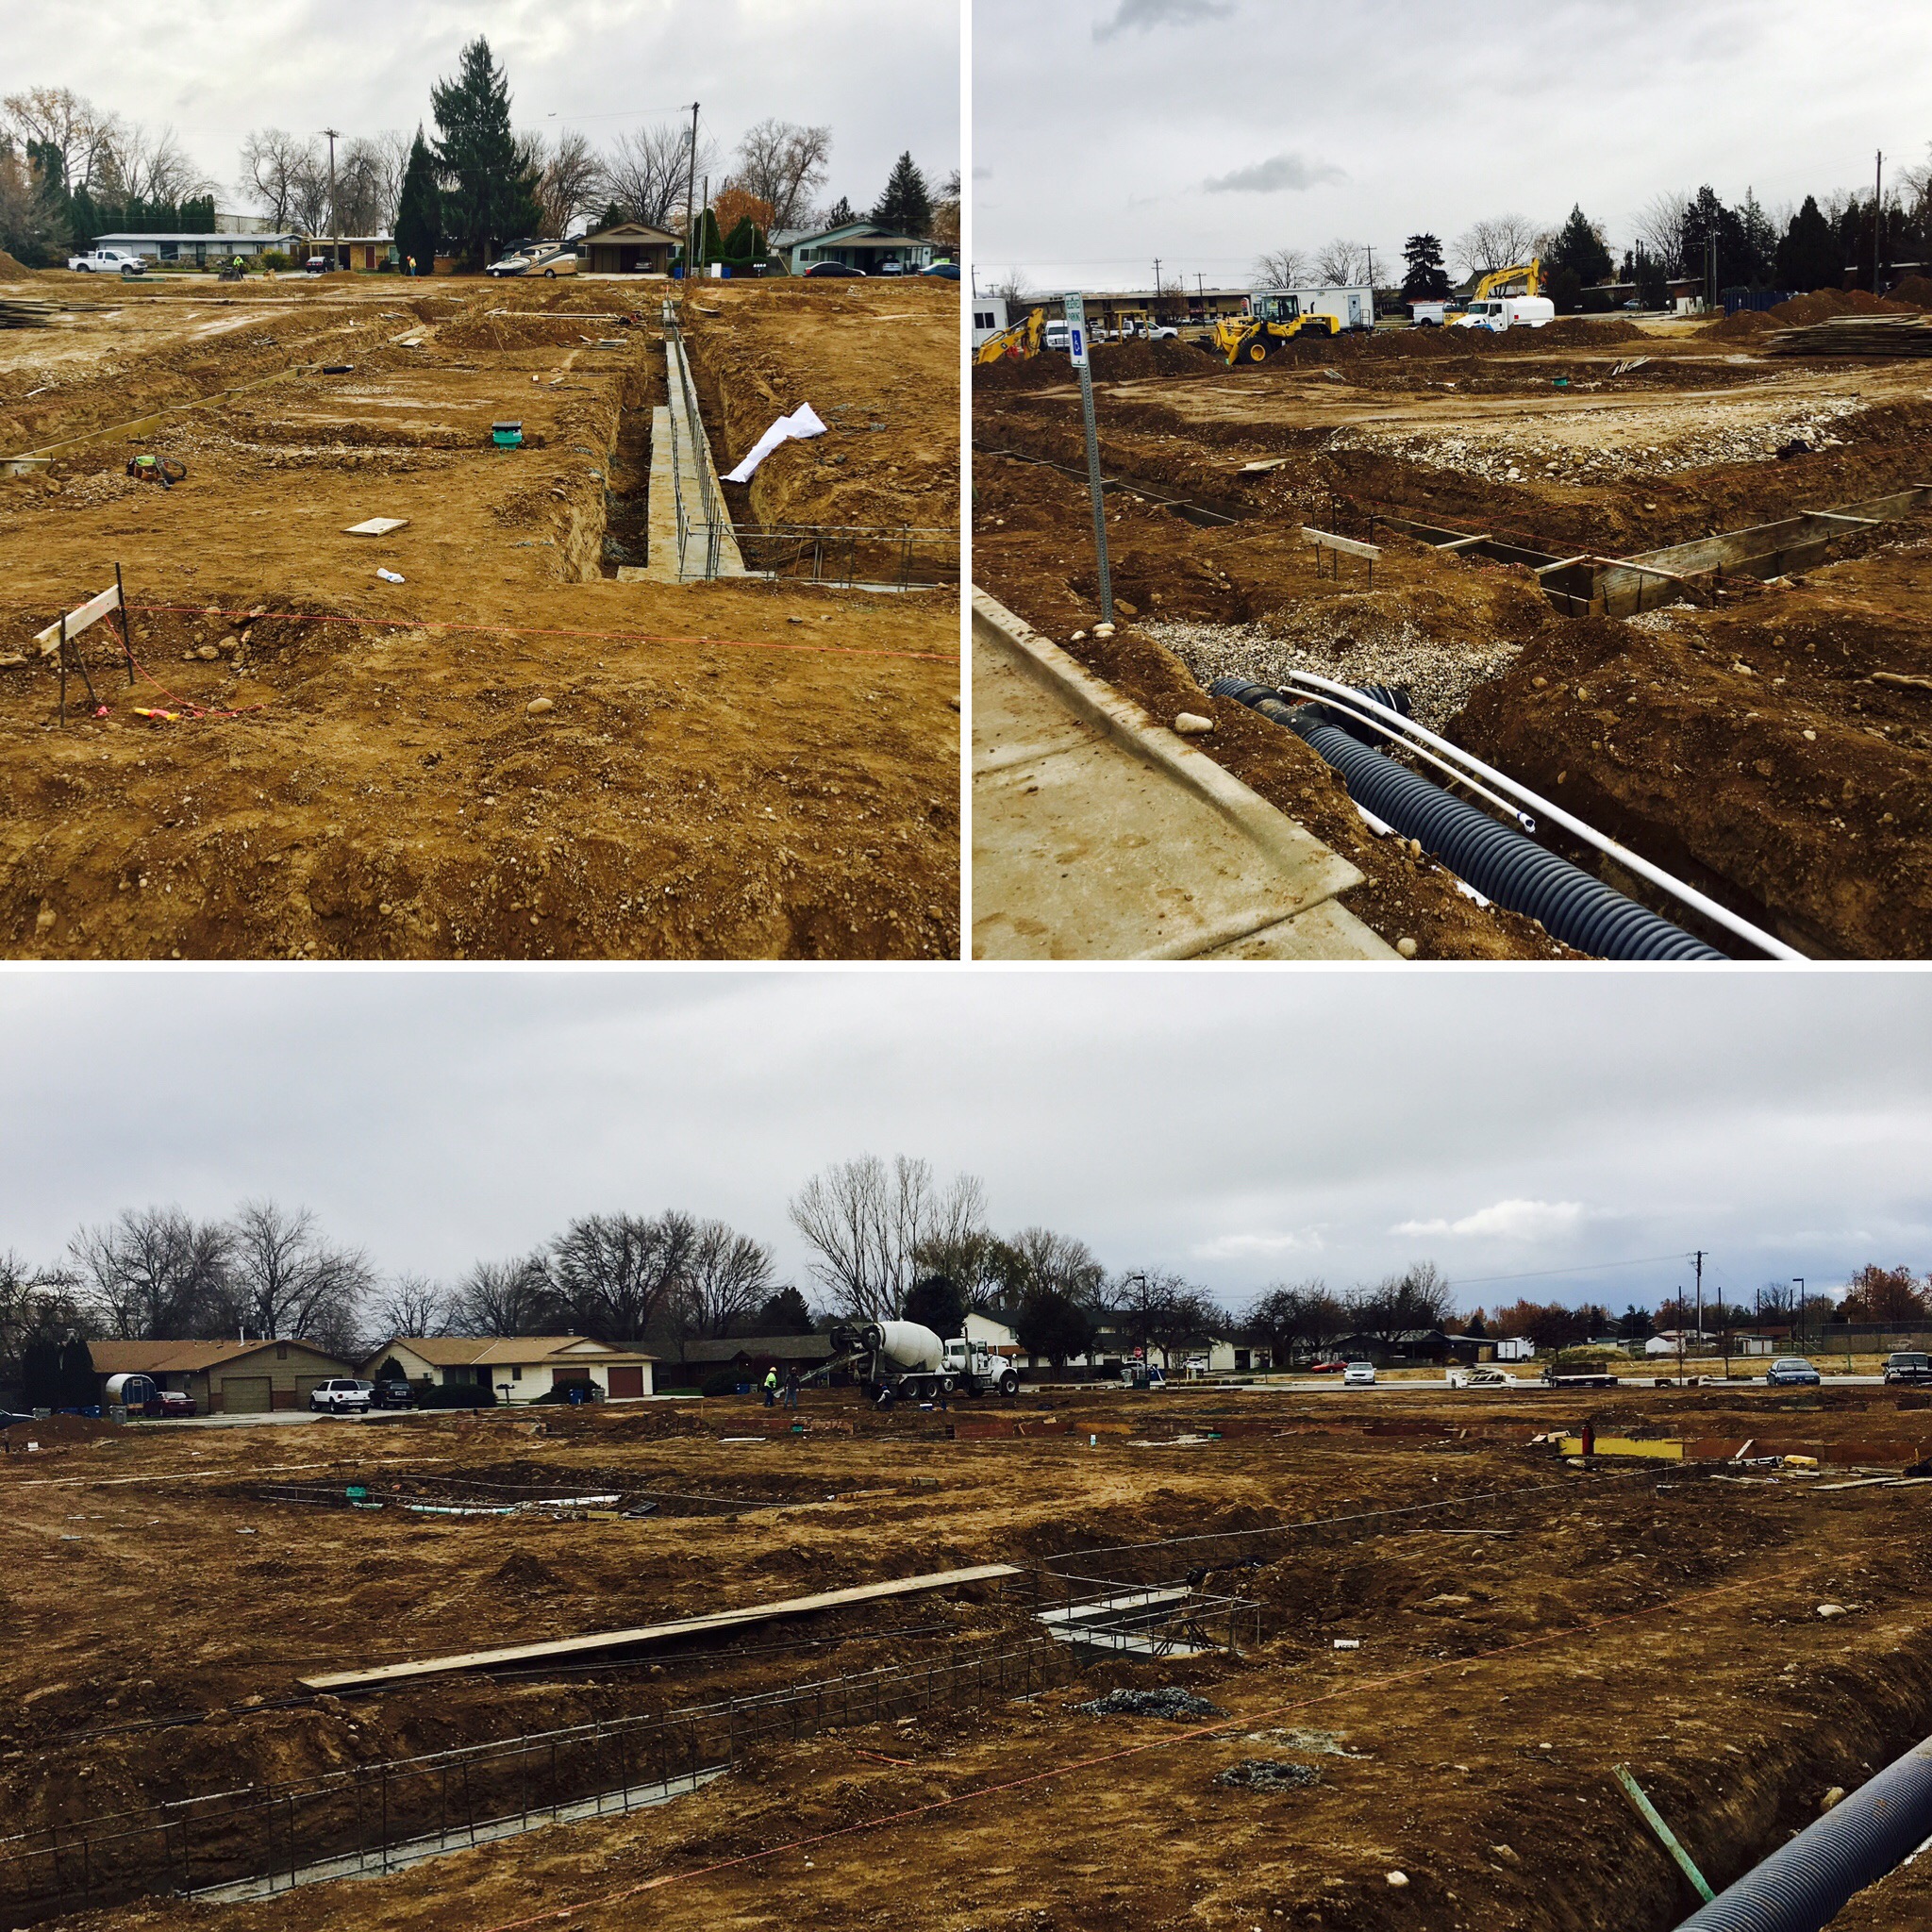 Progress at our Boise Site